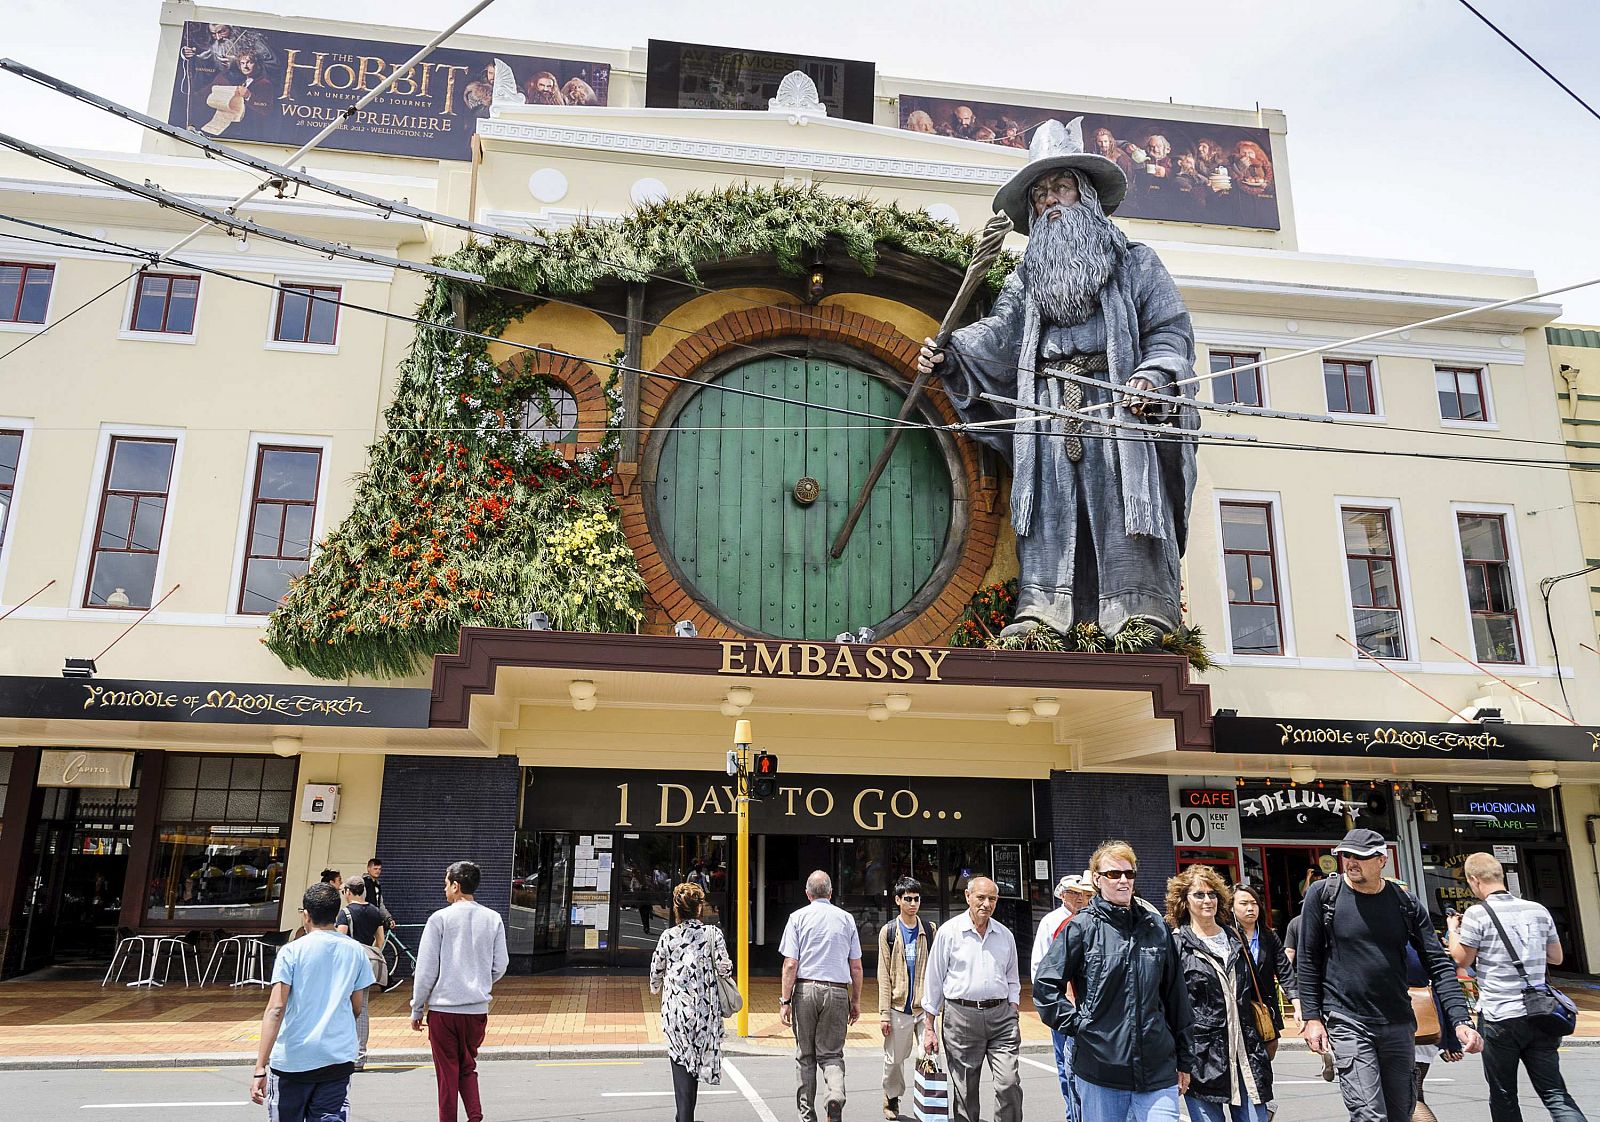 Pedestrians walk past a giant model of Gandalf mounted on the front of The Embassy Theatre in Wellington